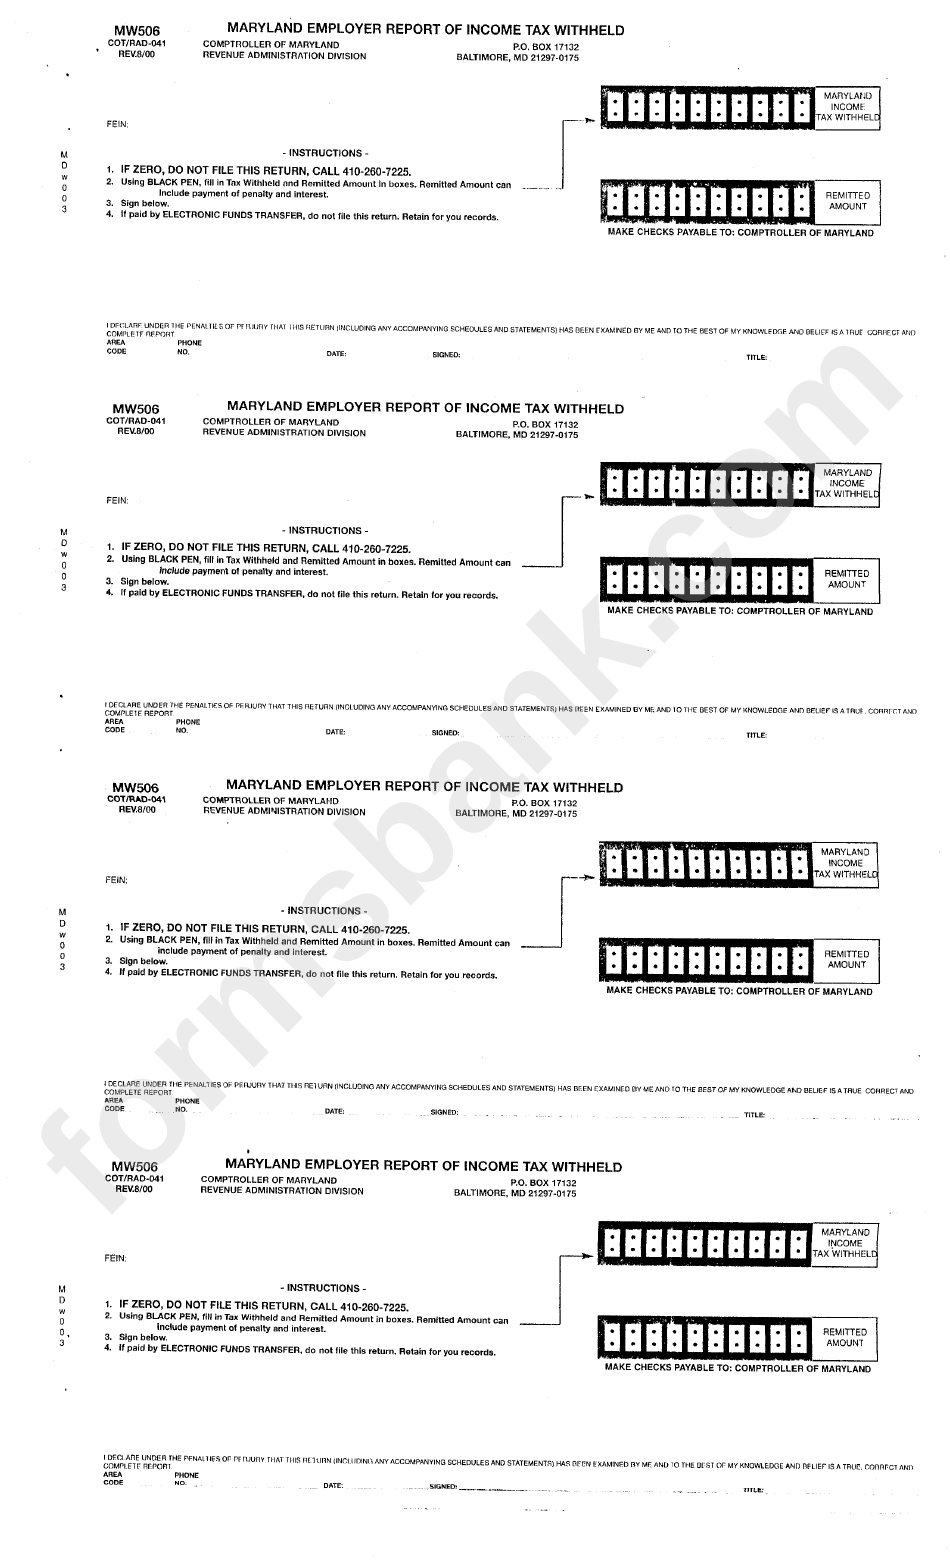 Form Mw506 Maryland Employer Report Of Tax Withheld printable